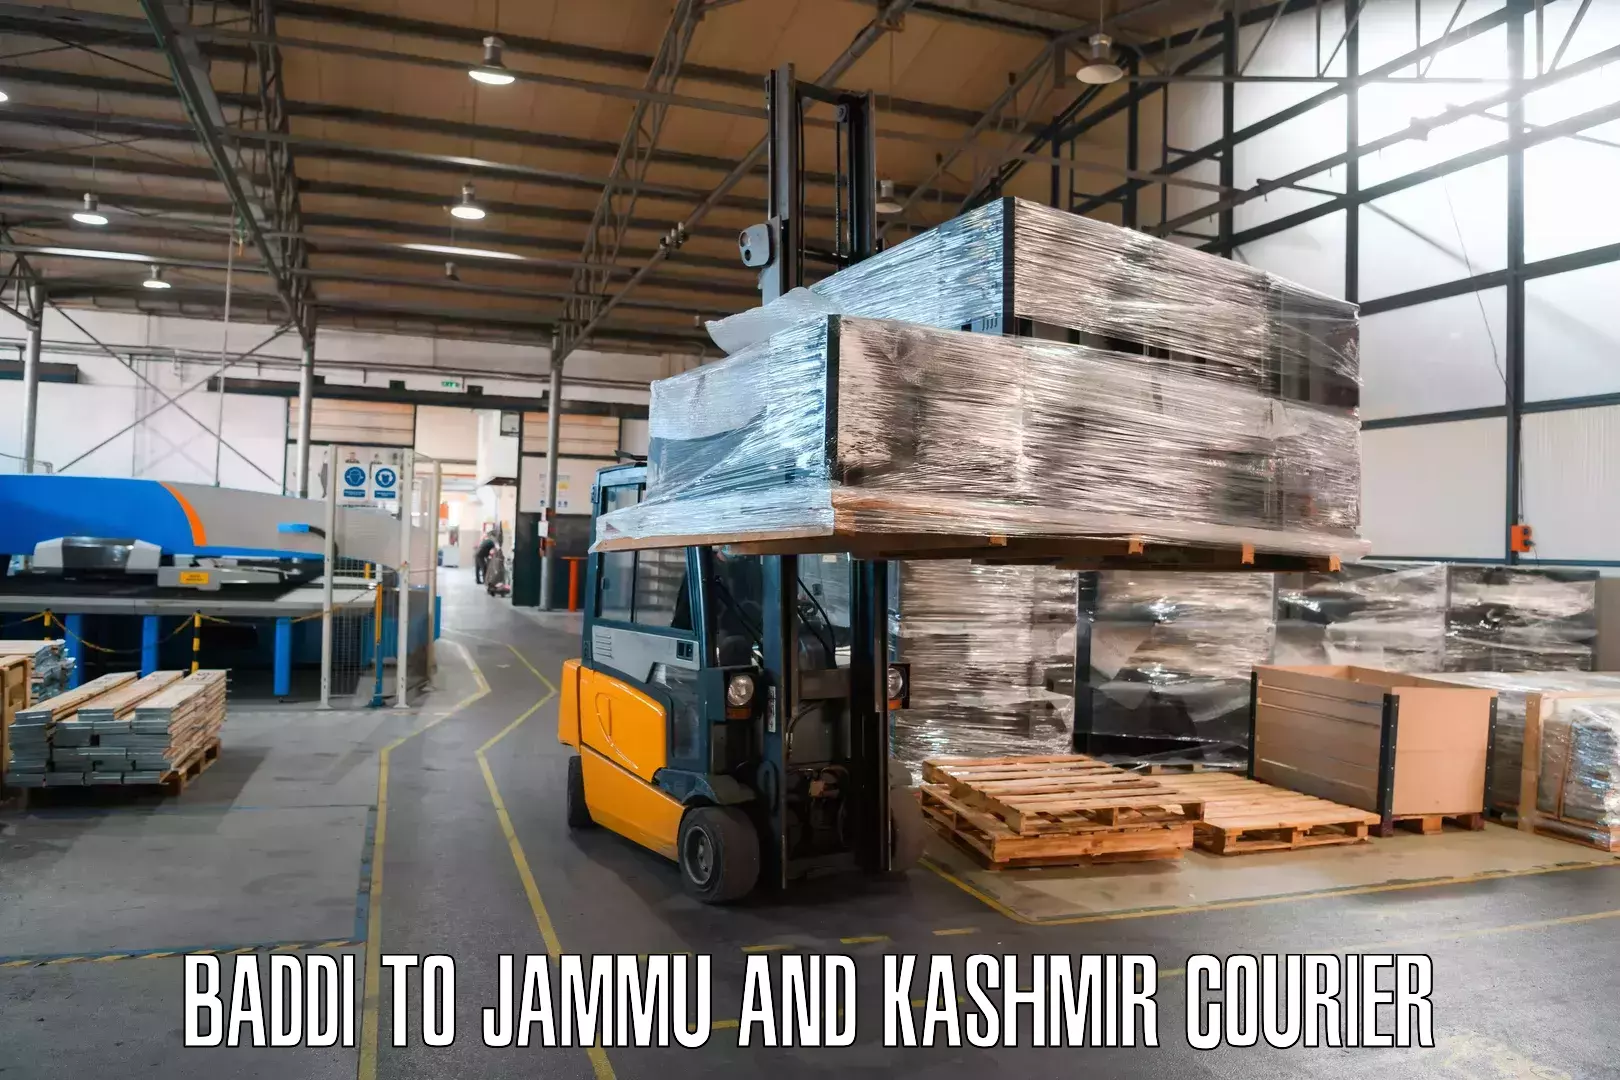 Dynamic courier operations Baddi to Jammu and Kashmir